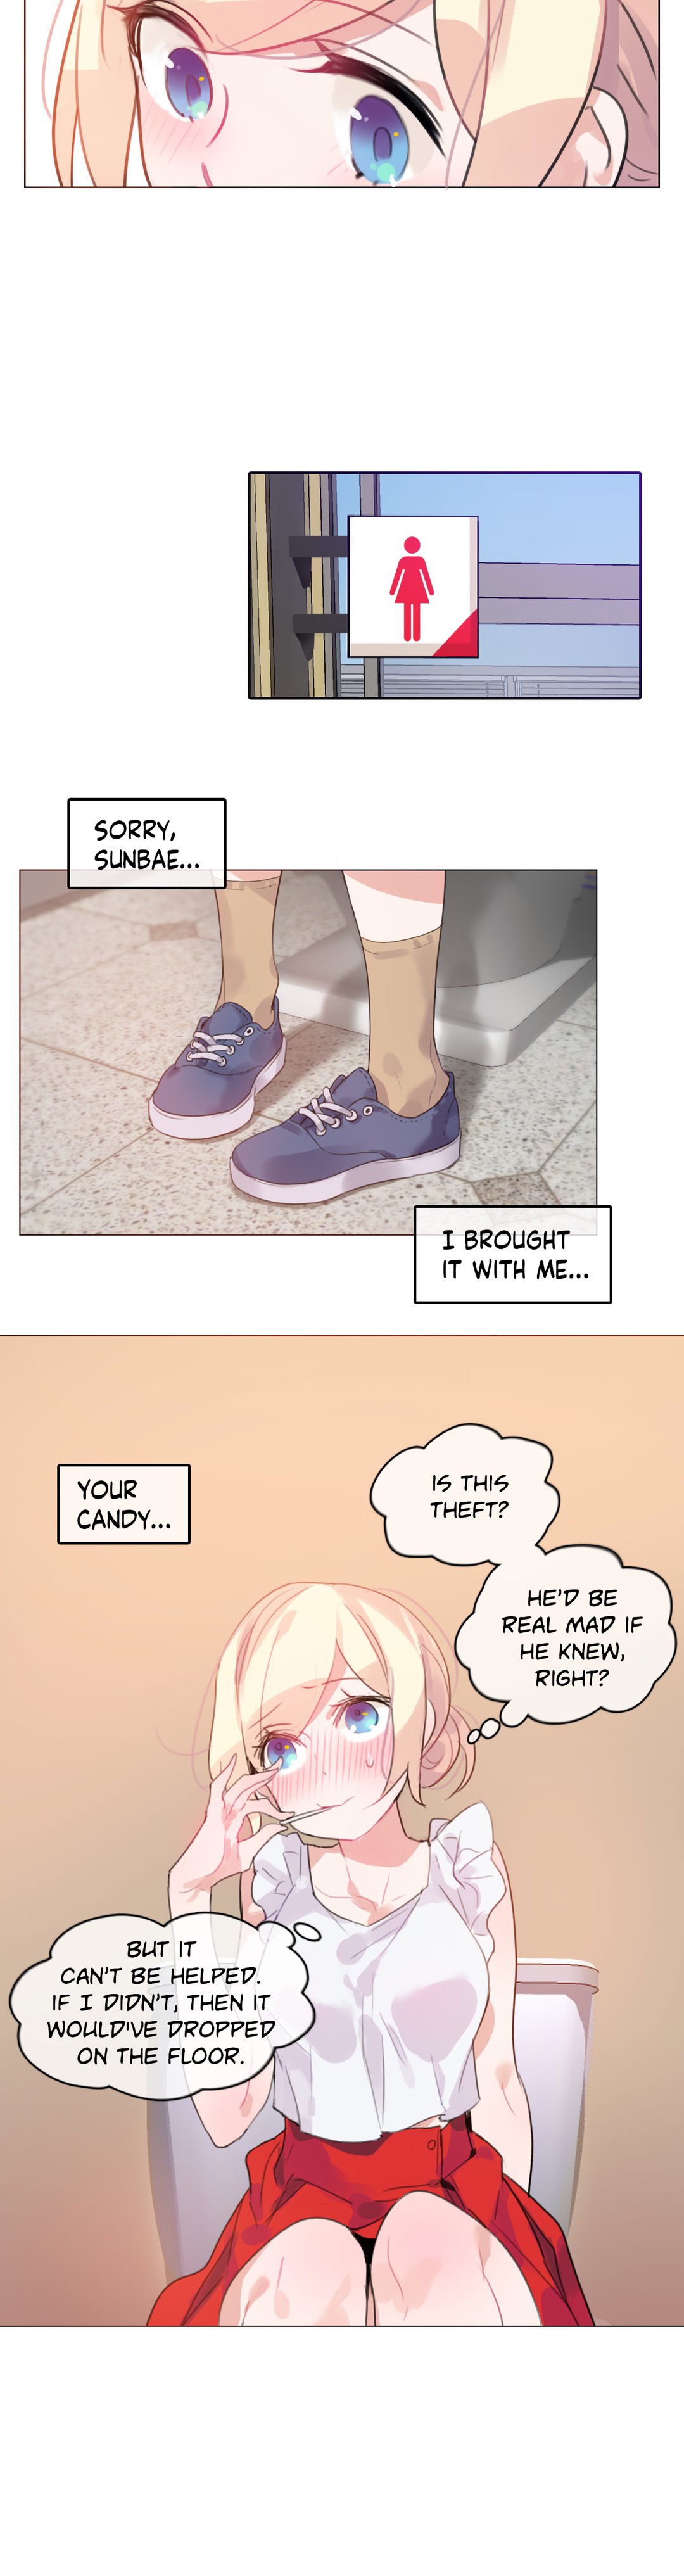 A Pervert's Daily Life - 16 page 12